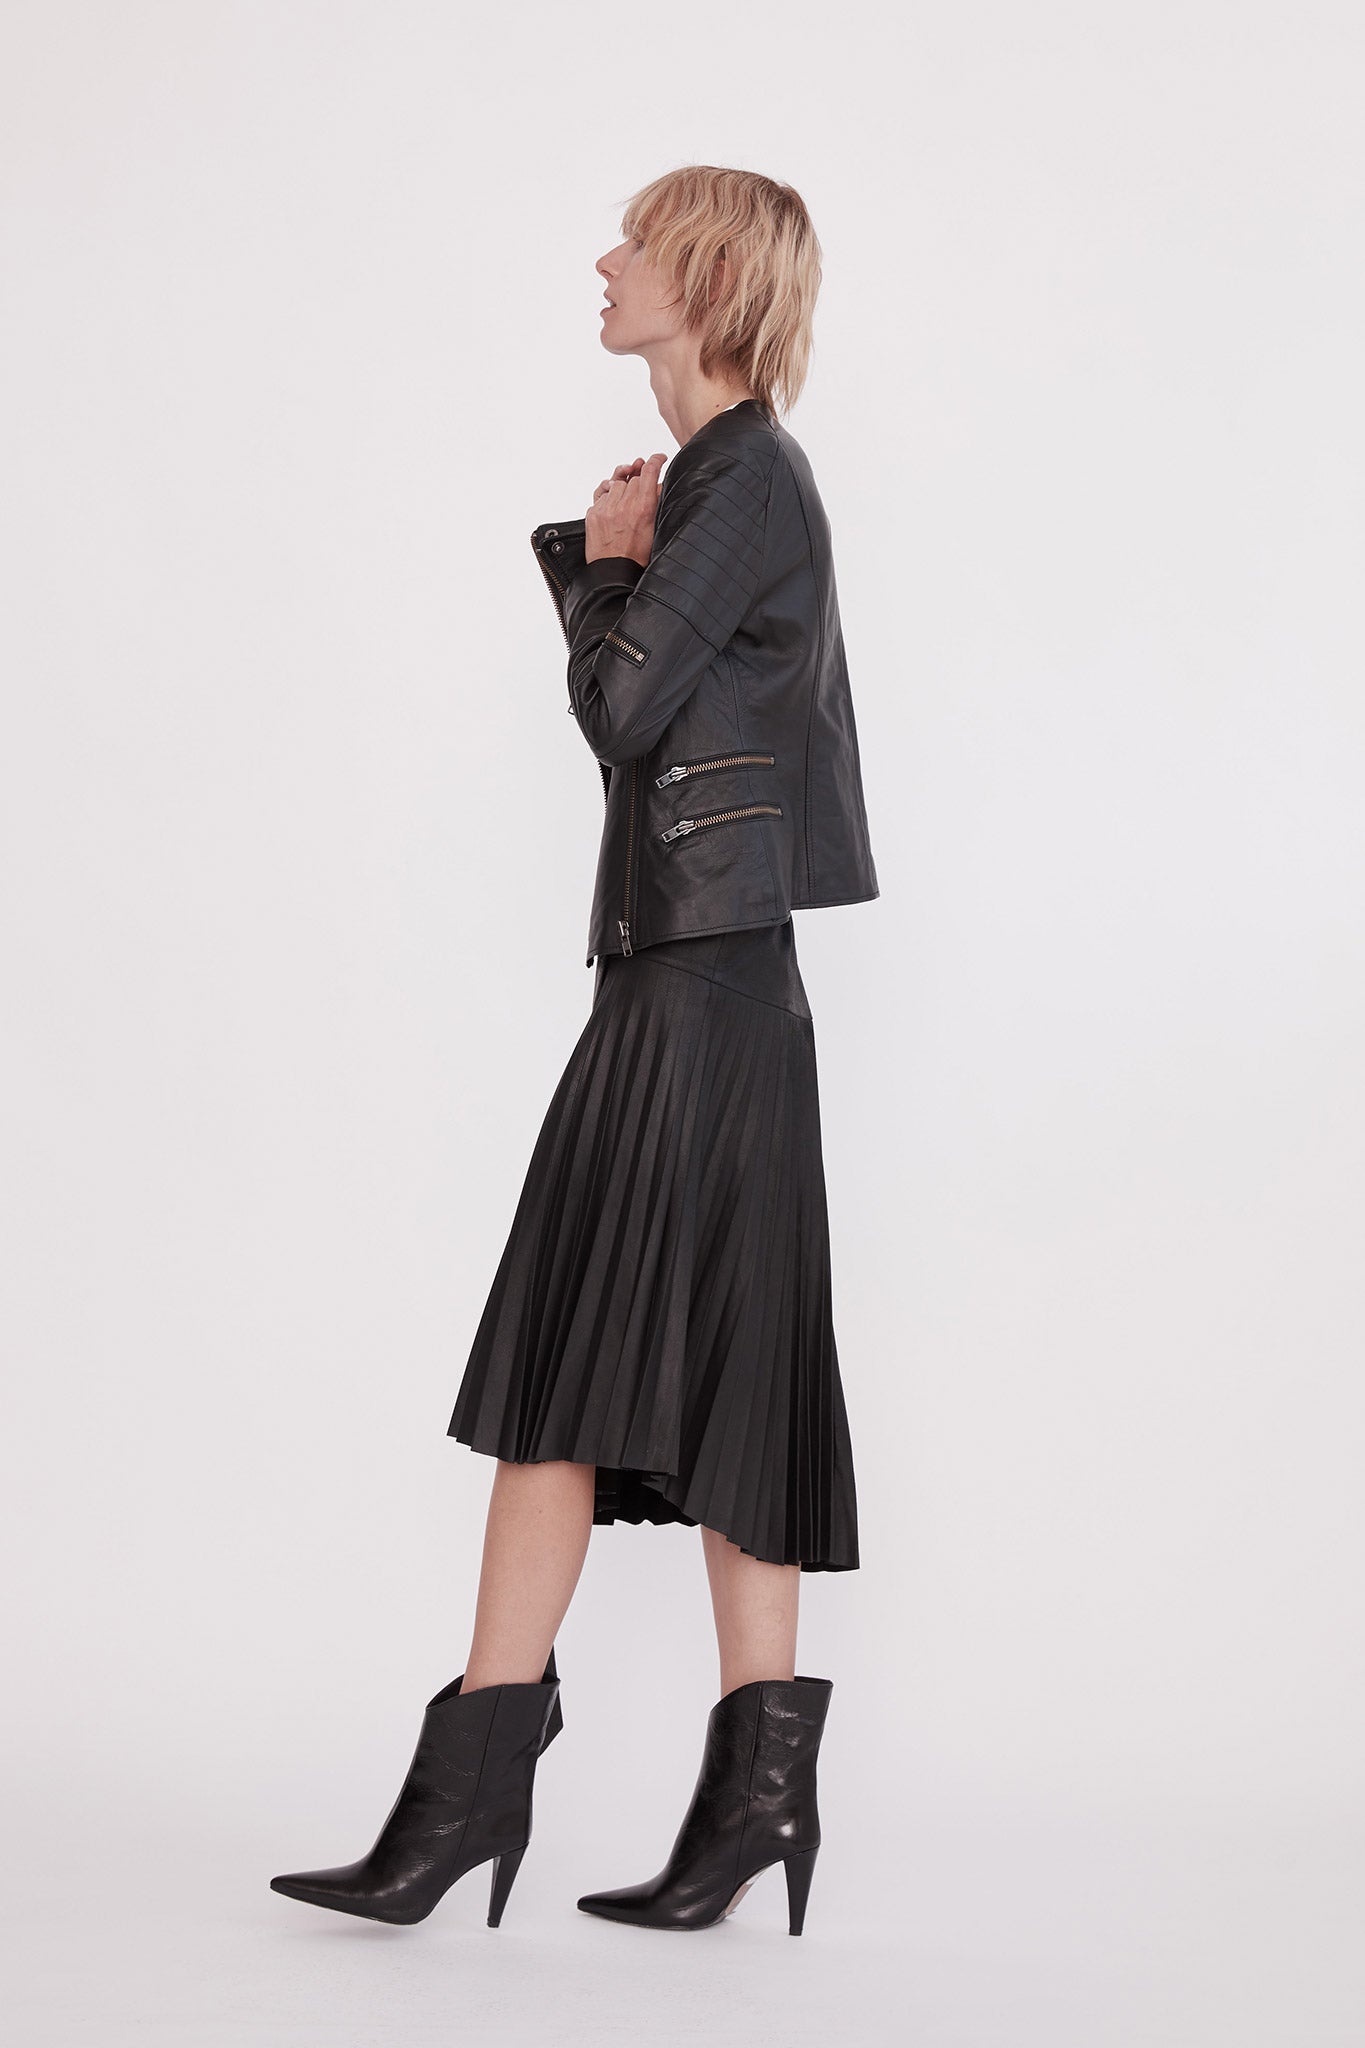 The Park Avenue Pleat Black Womens Leather Skirt Made By West14th 